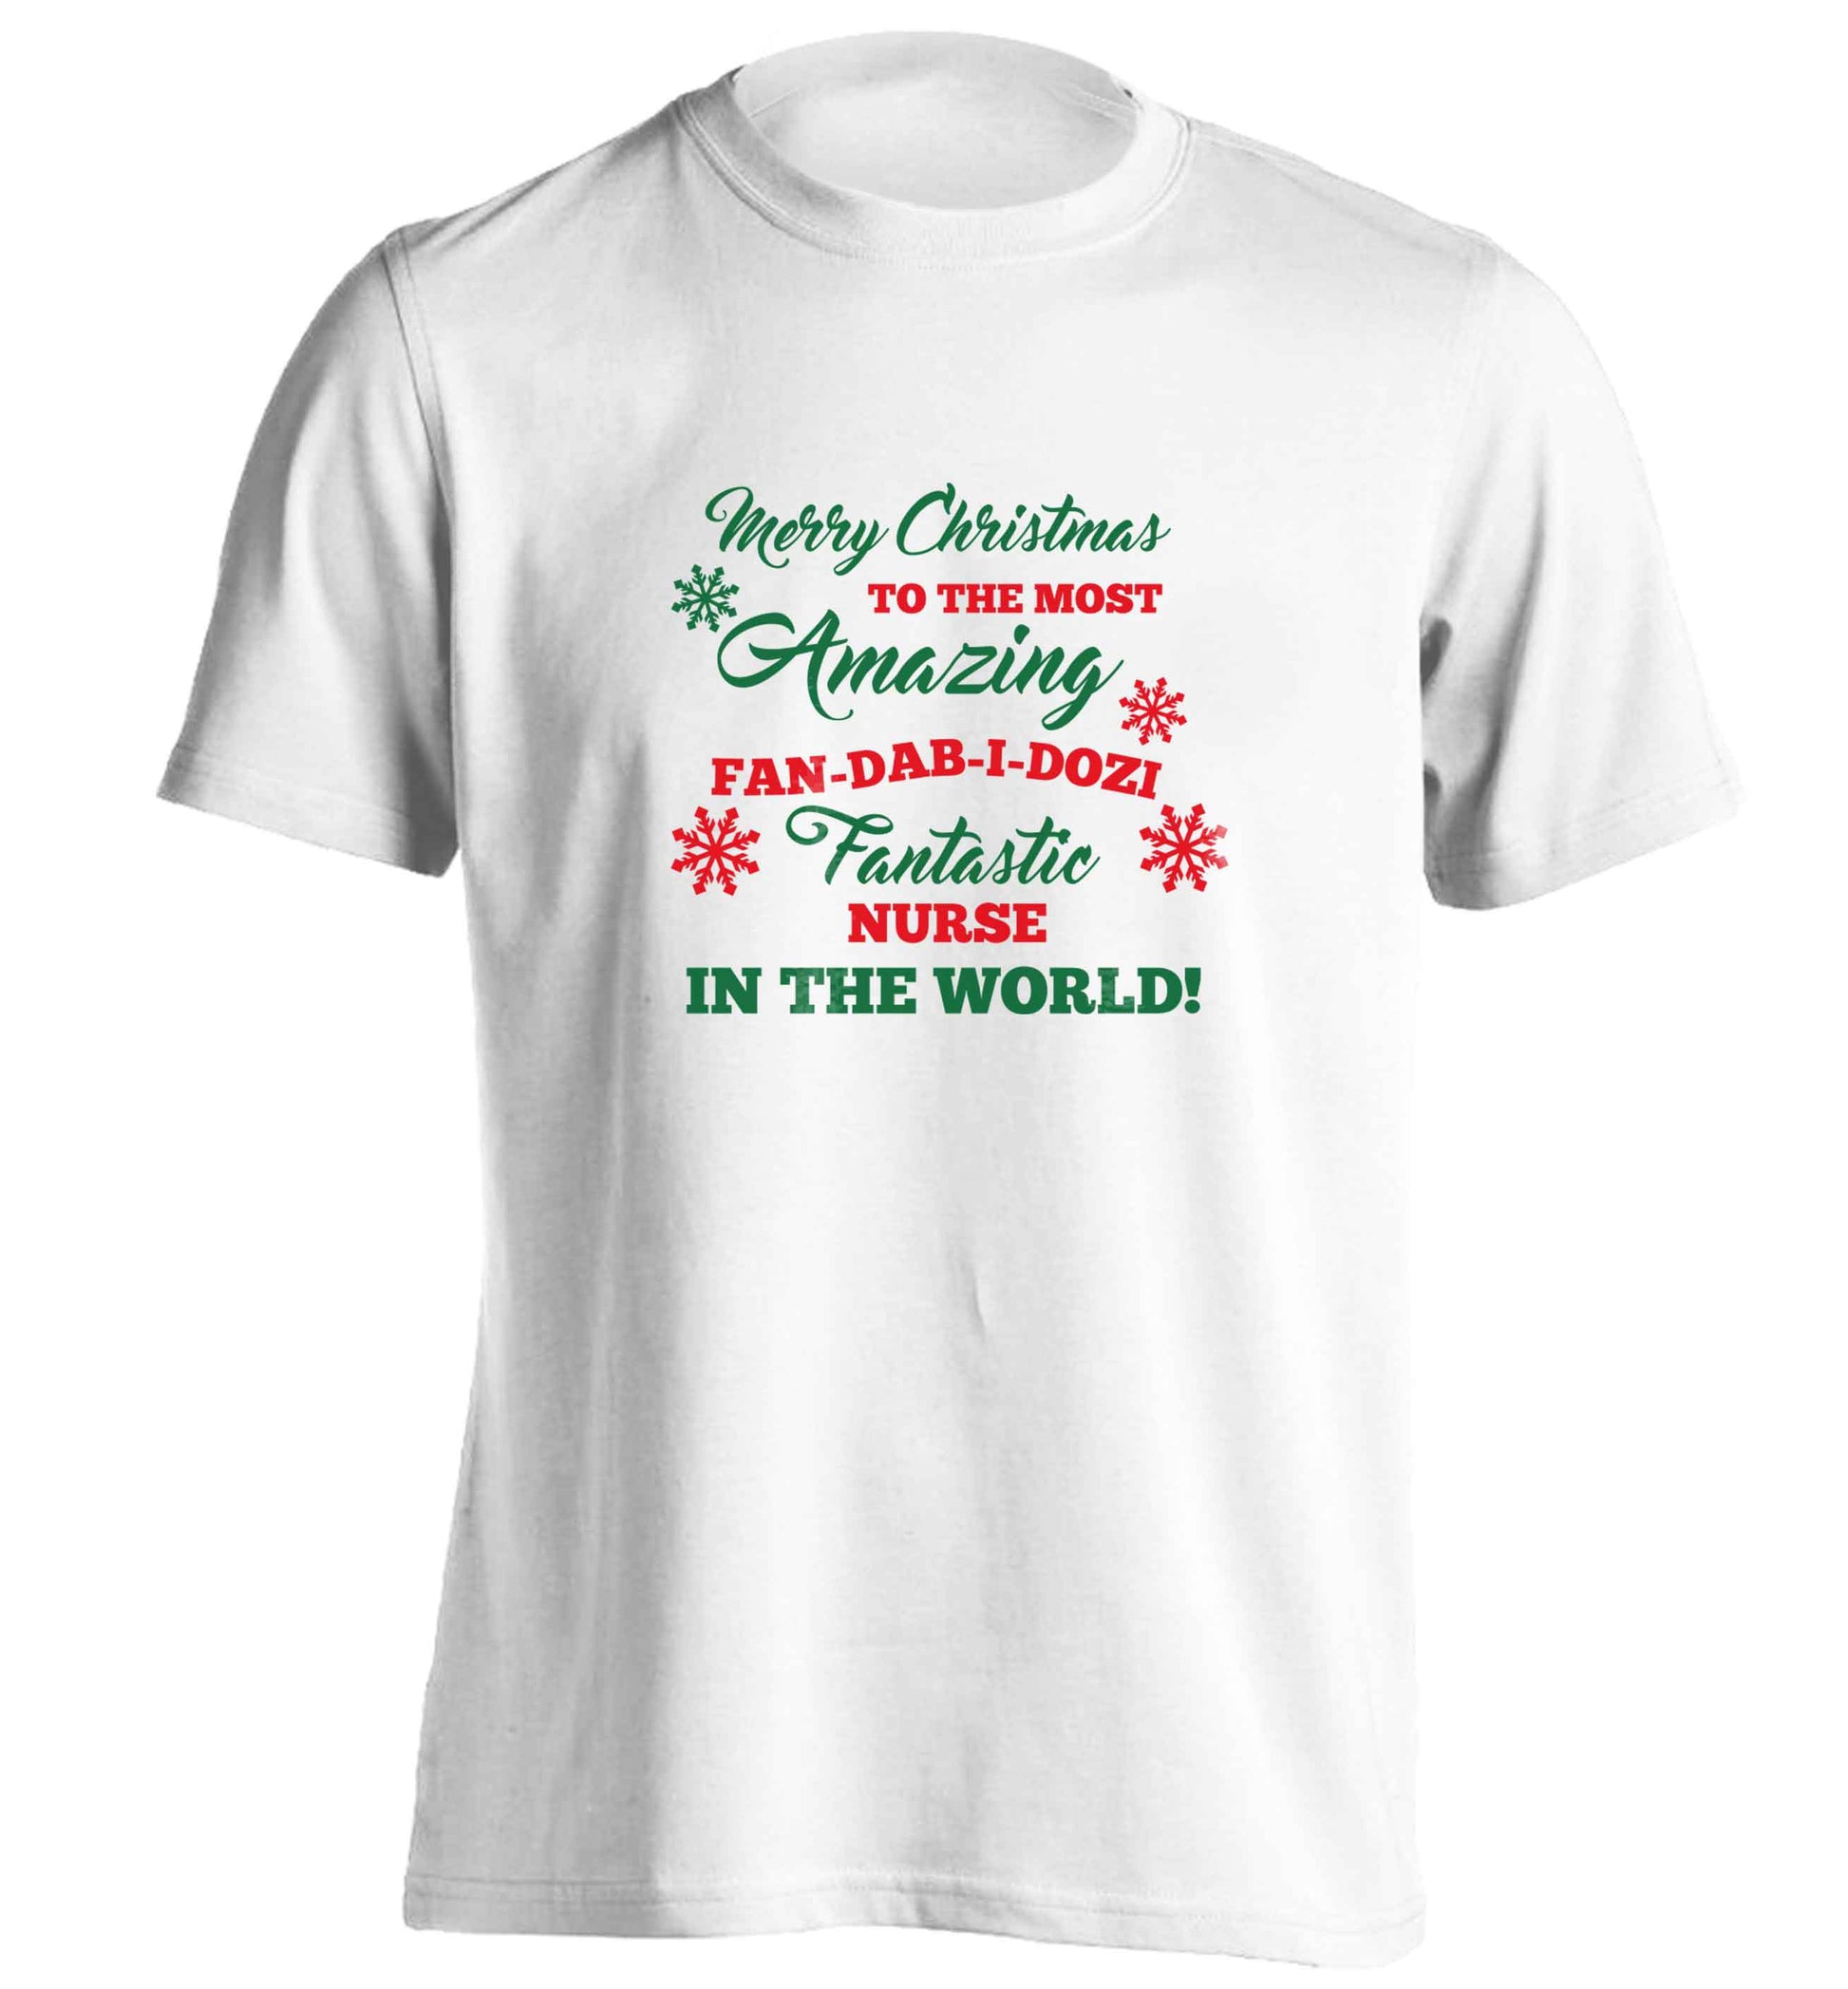 Merry Christmas to the most amazing nurse in the world! adults unisex white Tshirt 2XL